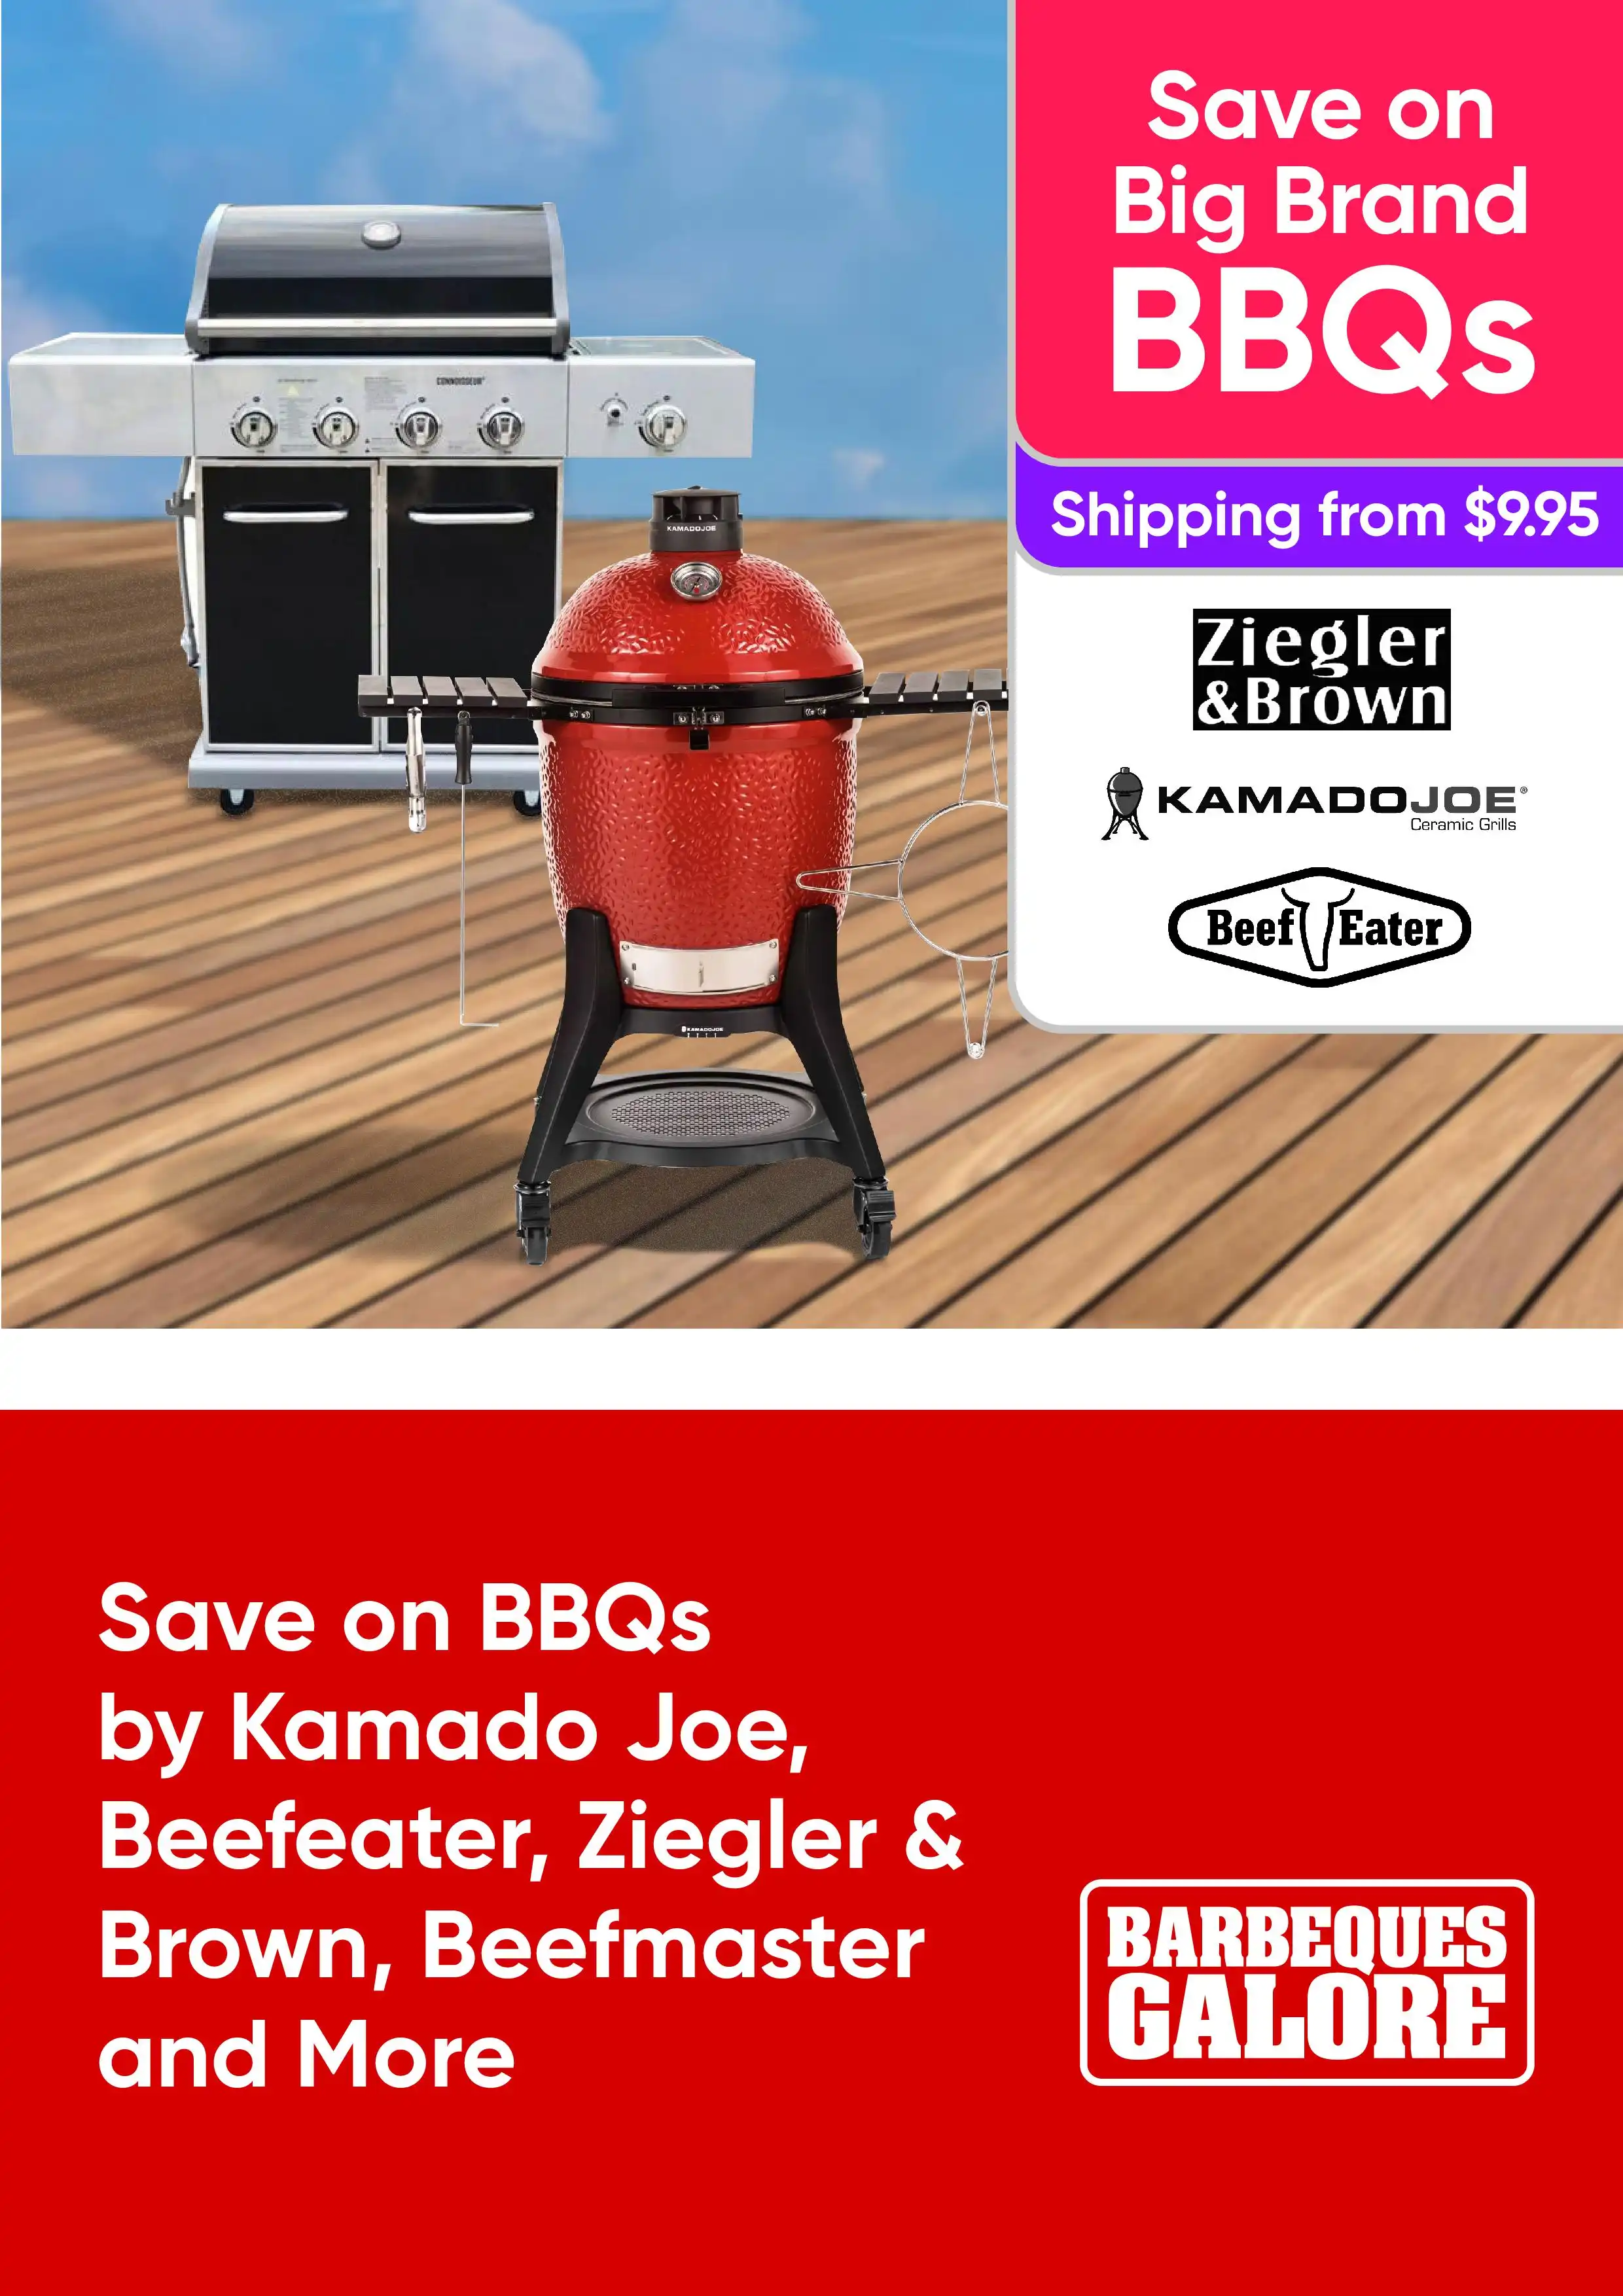 Save on BBQs by Kamado Joe, Beefeater, Ziegler & Brown, Beefmaster and More